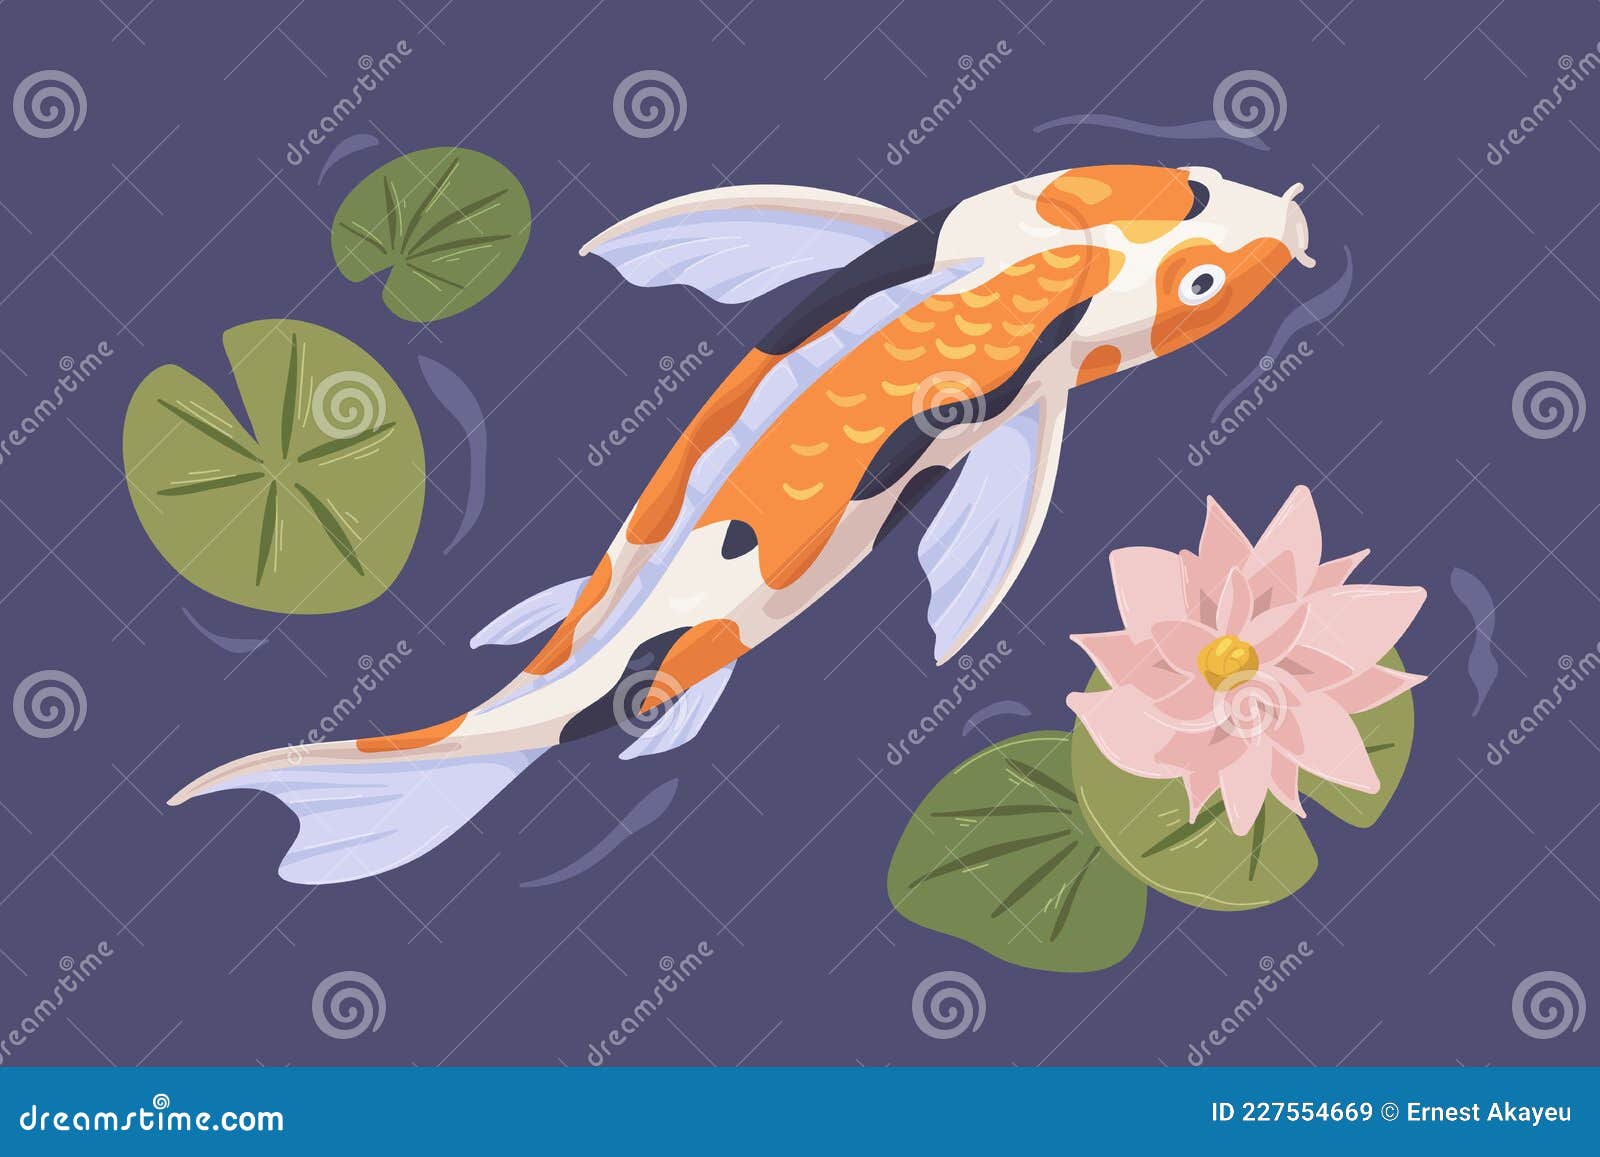 Japanese Koi Swimming in Pond with Flower. Japan Carp in Asian Water Garden  with Waterlily Stock Vector - Illustration of carp, ocean: 227554669